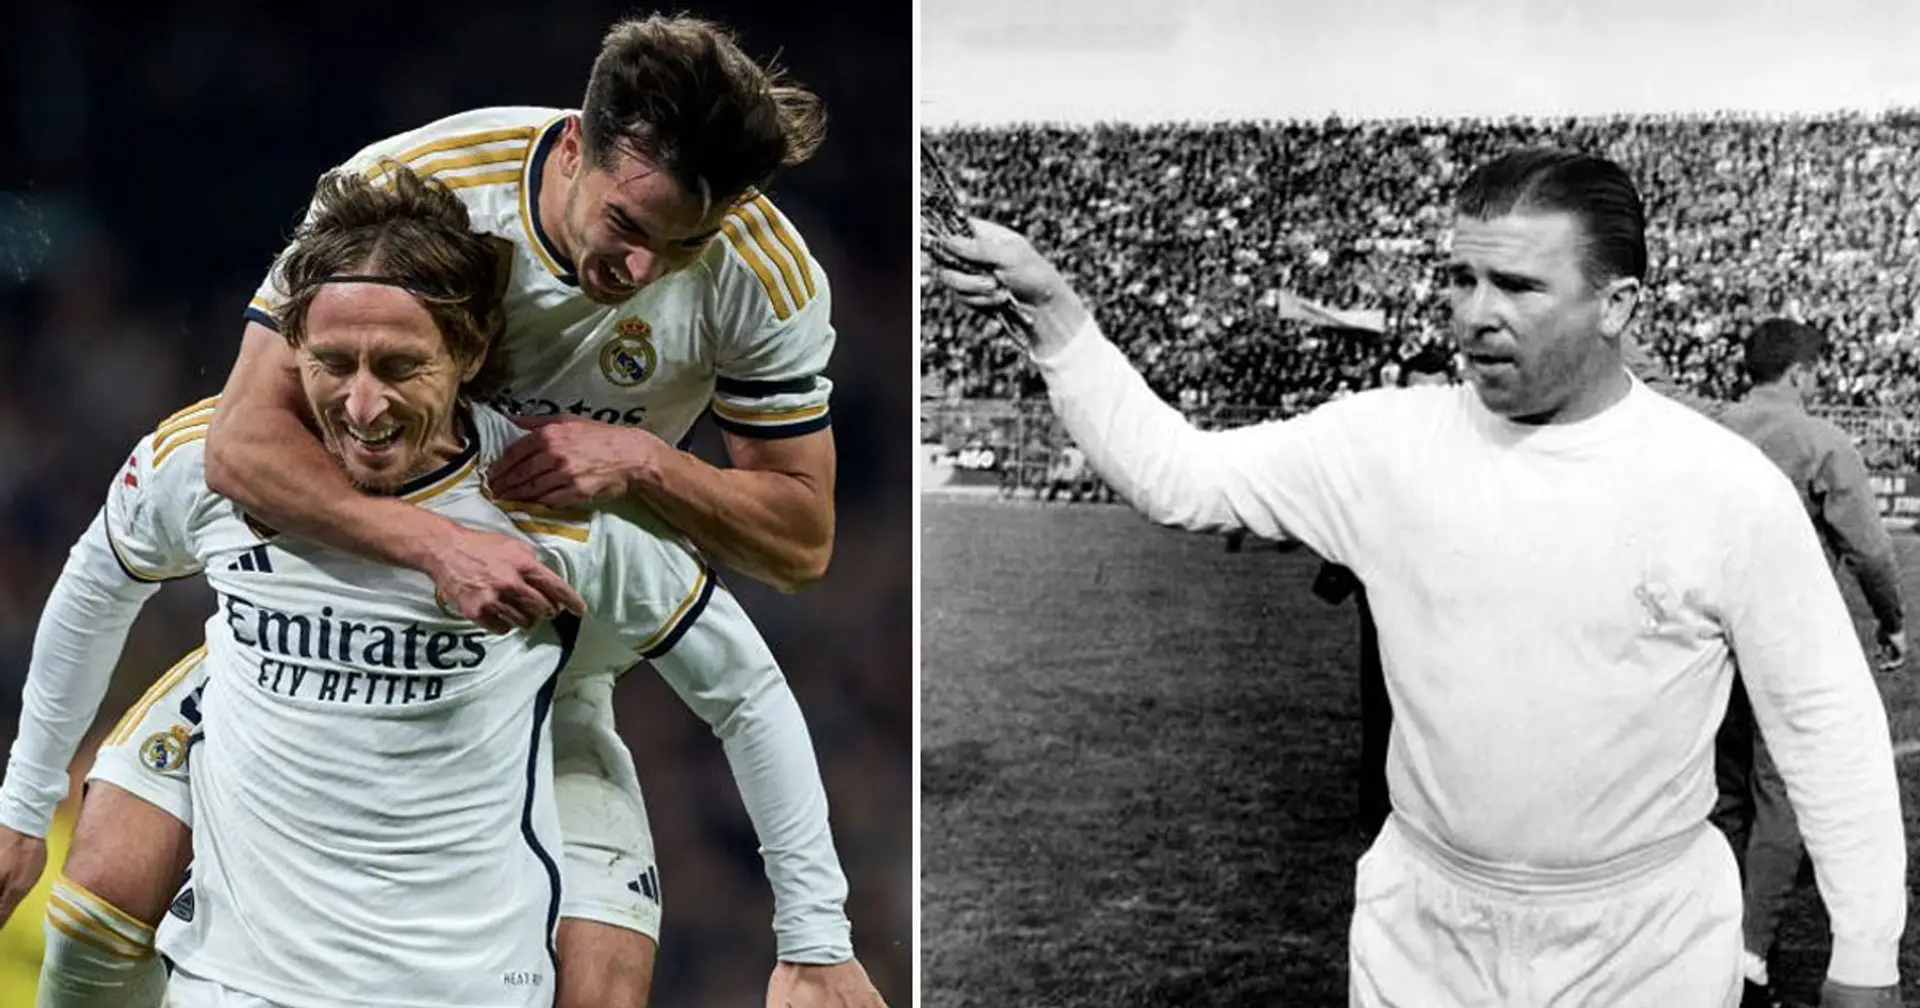 How Modric can beat Puskas' record and become the oldest scorer at Real Madrid - date and game revealed